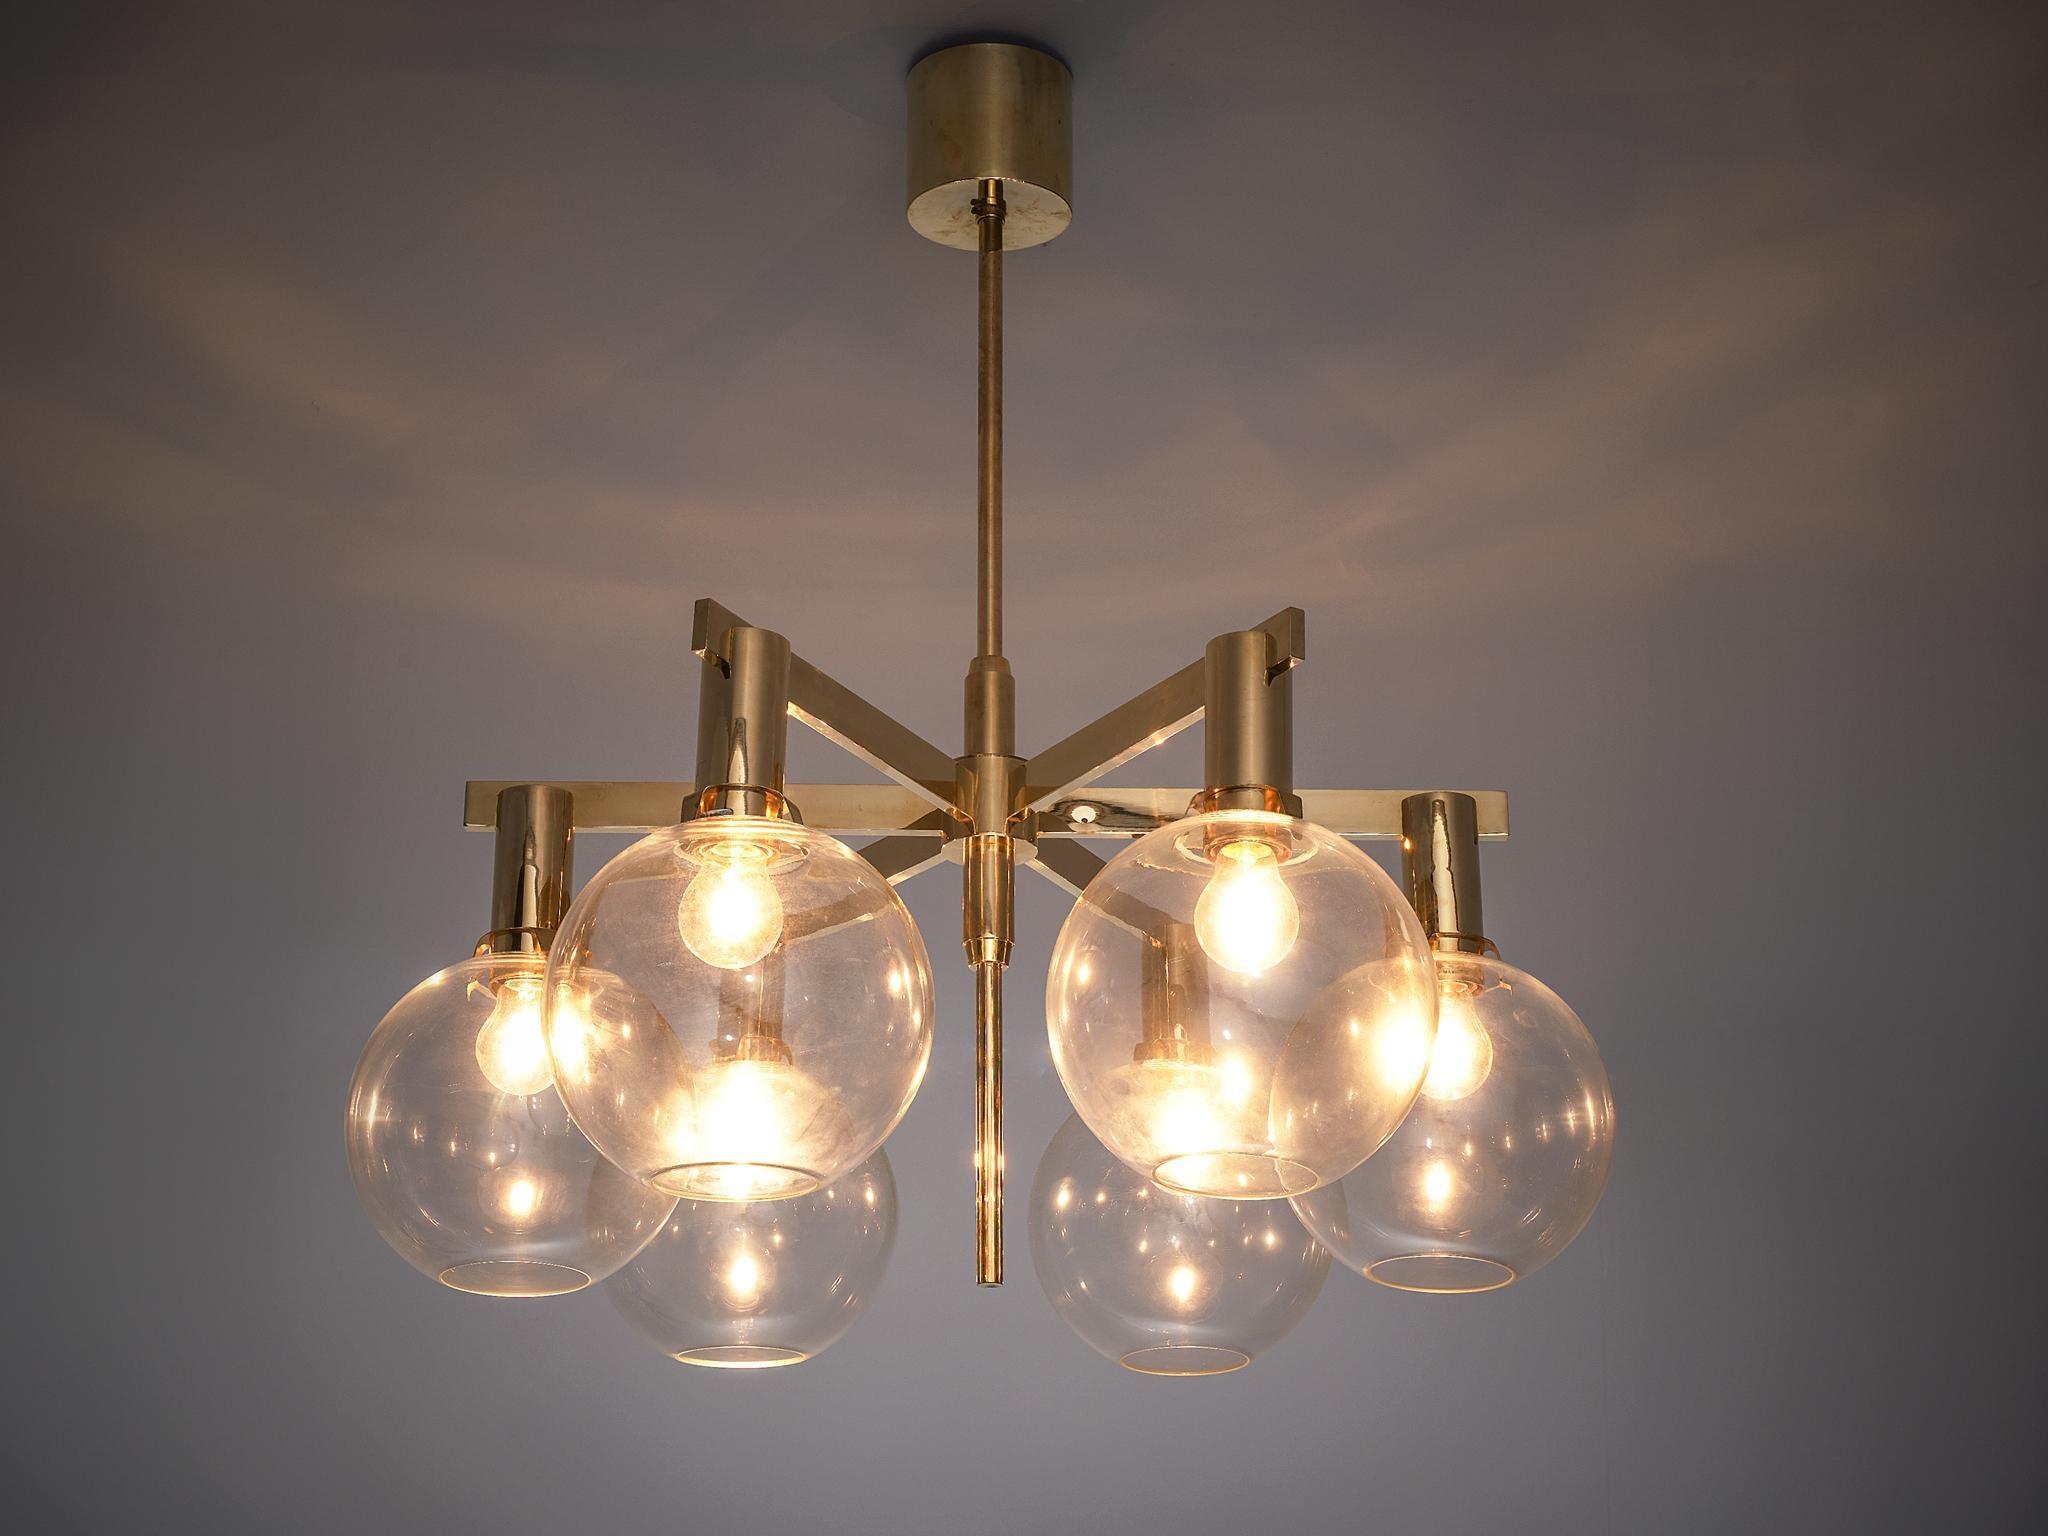 Hans-Agne Jakobsson, ceiling lamp model T-348/6 'Pastoral', brass and glass, Sweden, 1950s.

This chandelier is designed by Hans-Agne Jakobsson and produced by Hans-Agne Jakobsson AB in Markaryd, Sweden. The brass frame has six brass tubes that